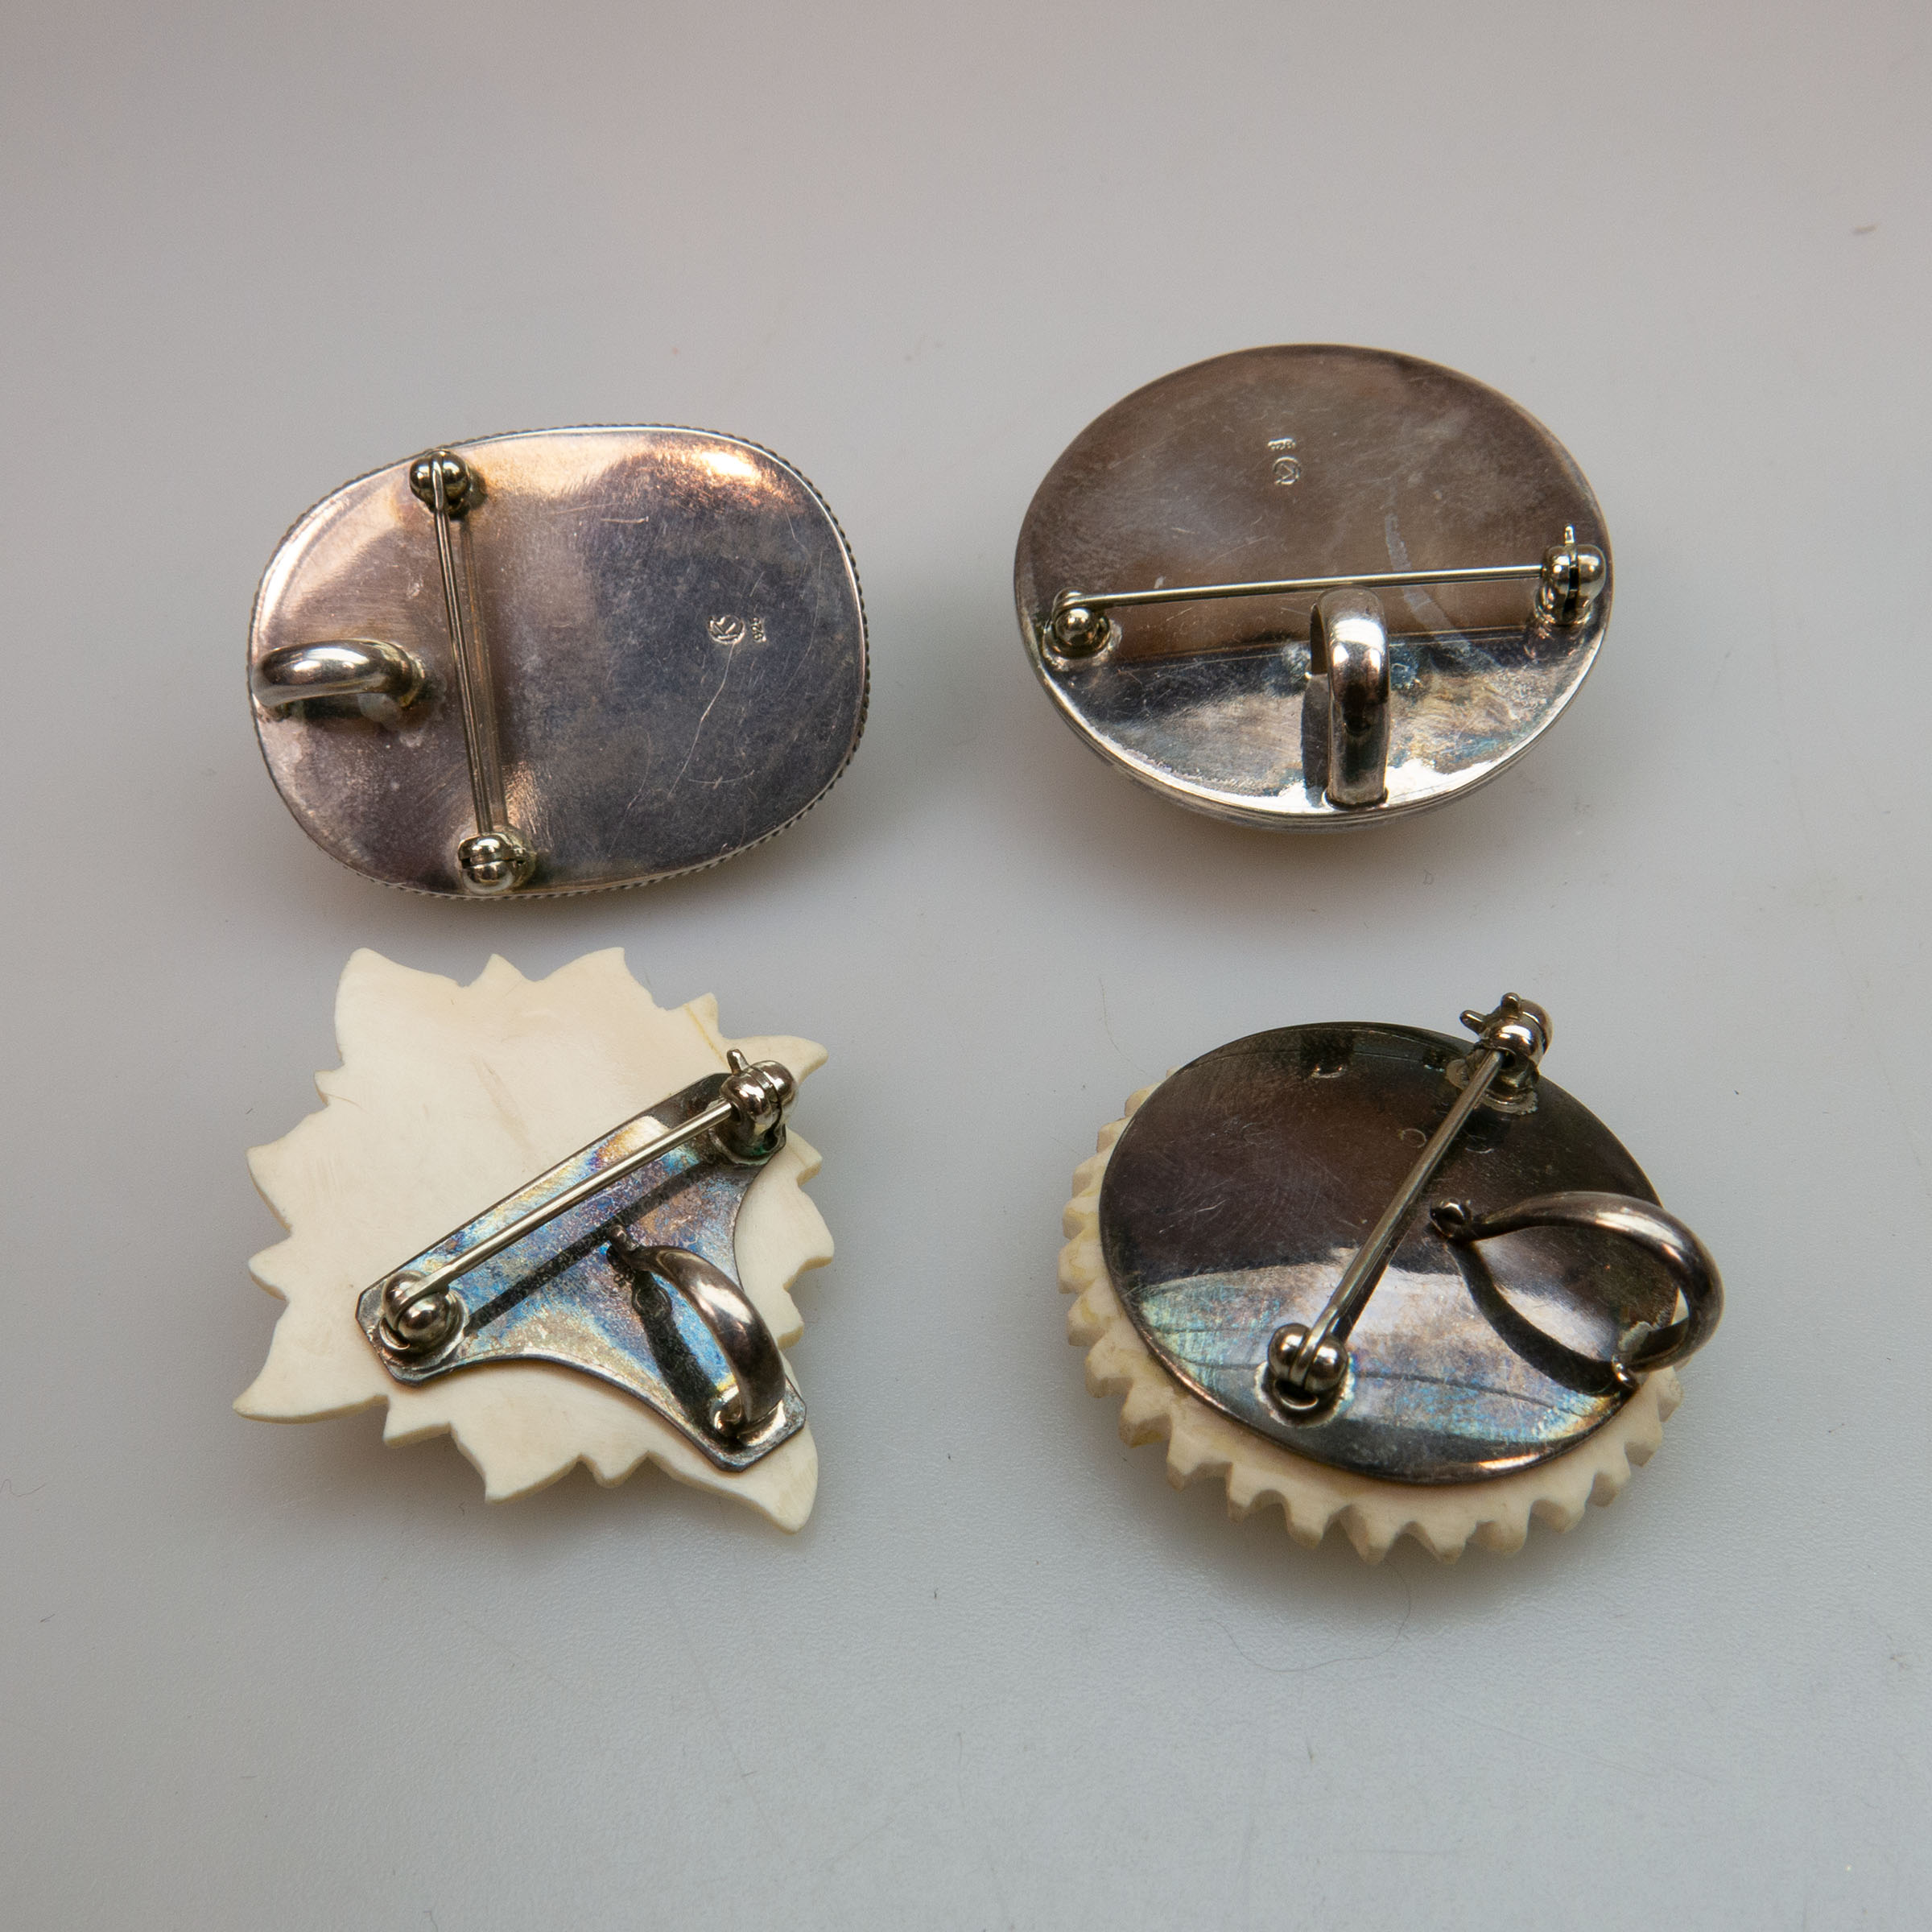 4 Indonesian Sterling Silver Pendant/Brooches